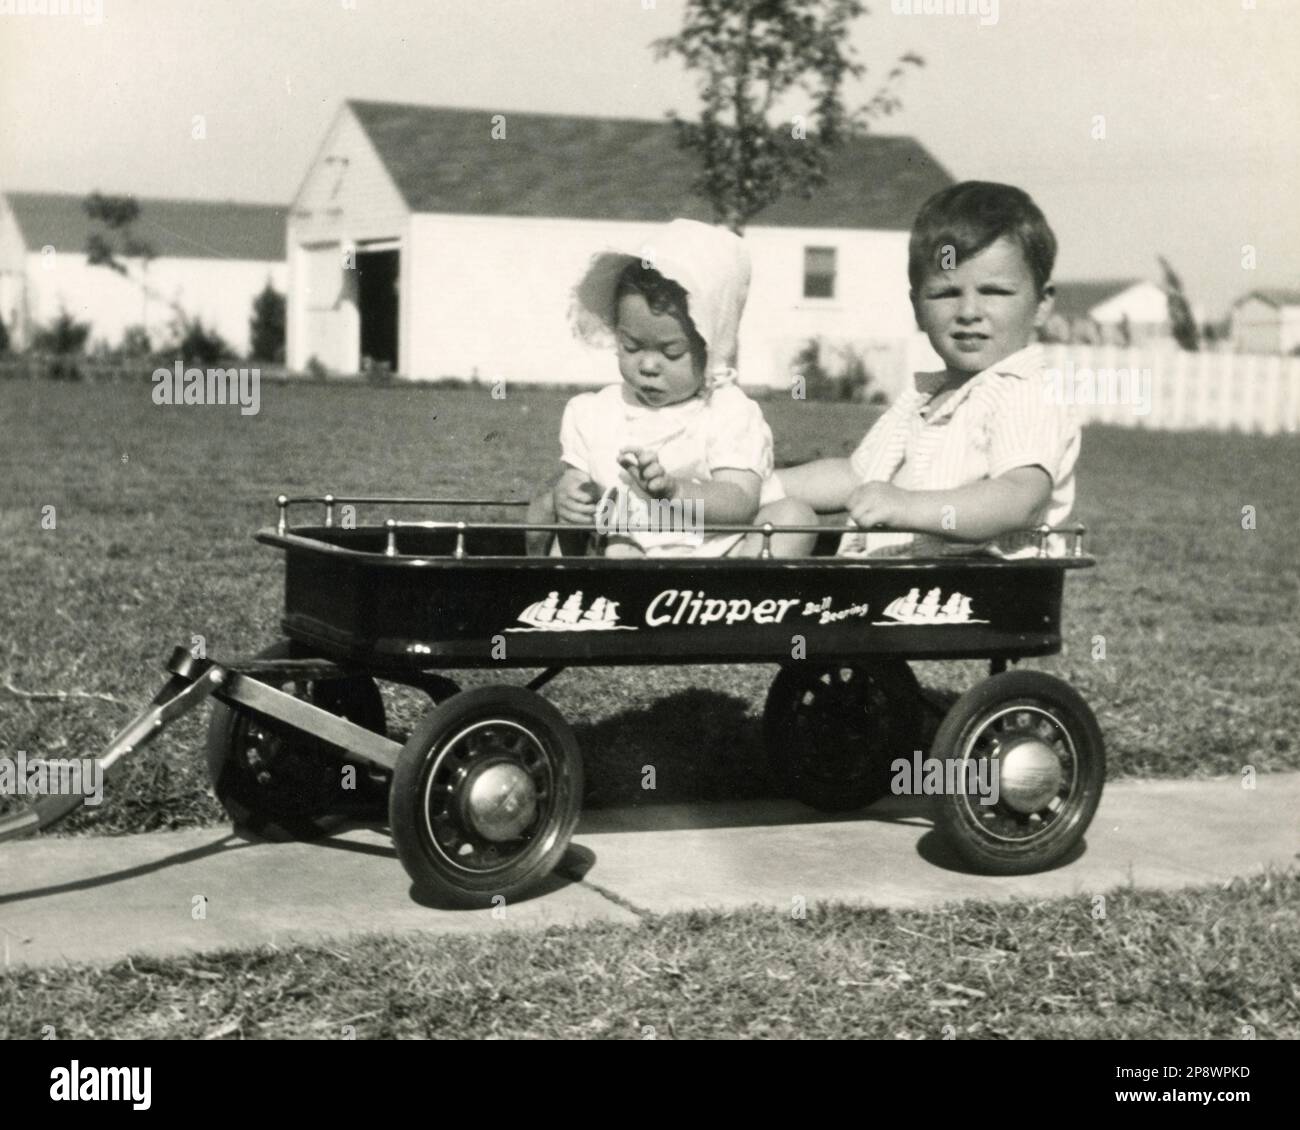 Little Red Wagon, Children in Yankee Clipper Wagon, Children Playing, about 1930s, 1940s 1950s Stock Photo